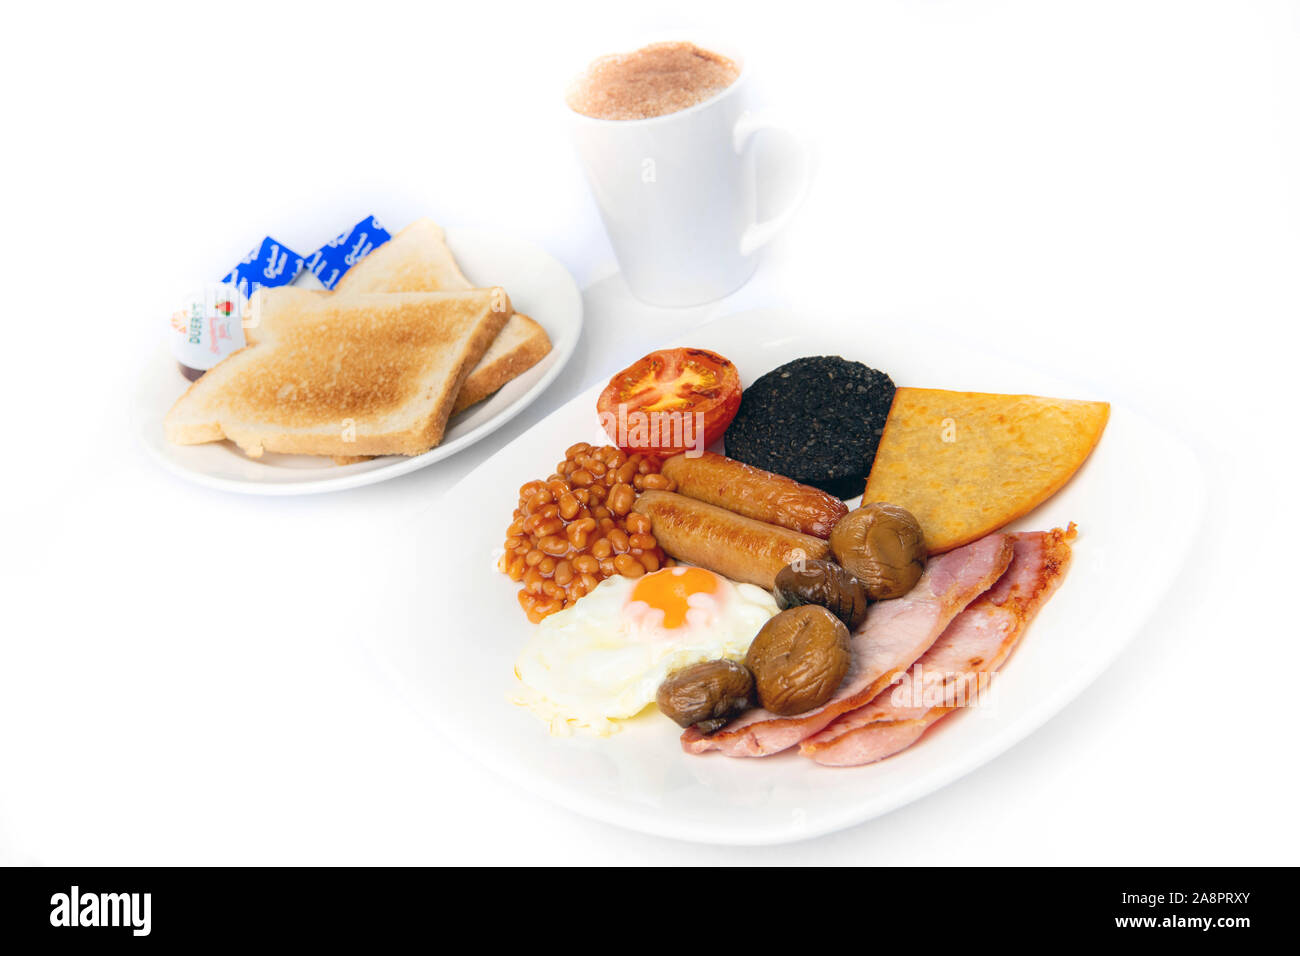 North Sea Ferries, Food Pictures, Aberdeen Banque D'Images